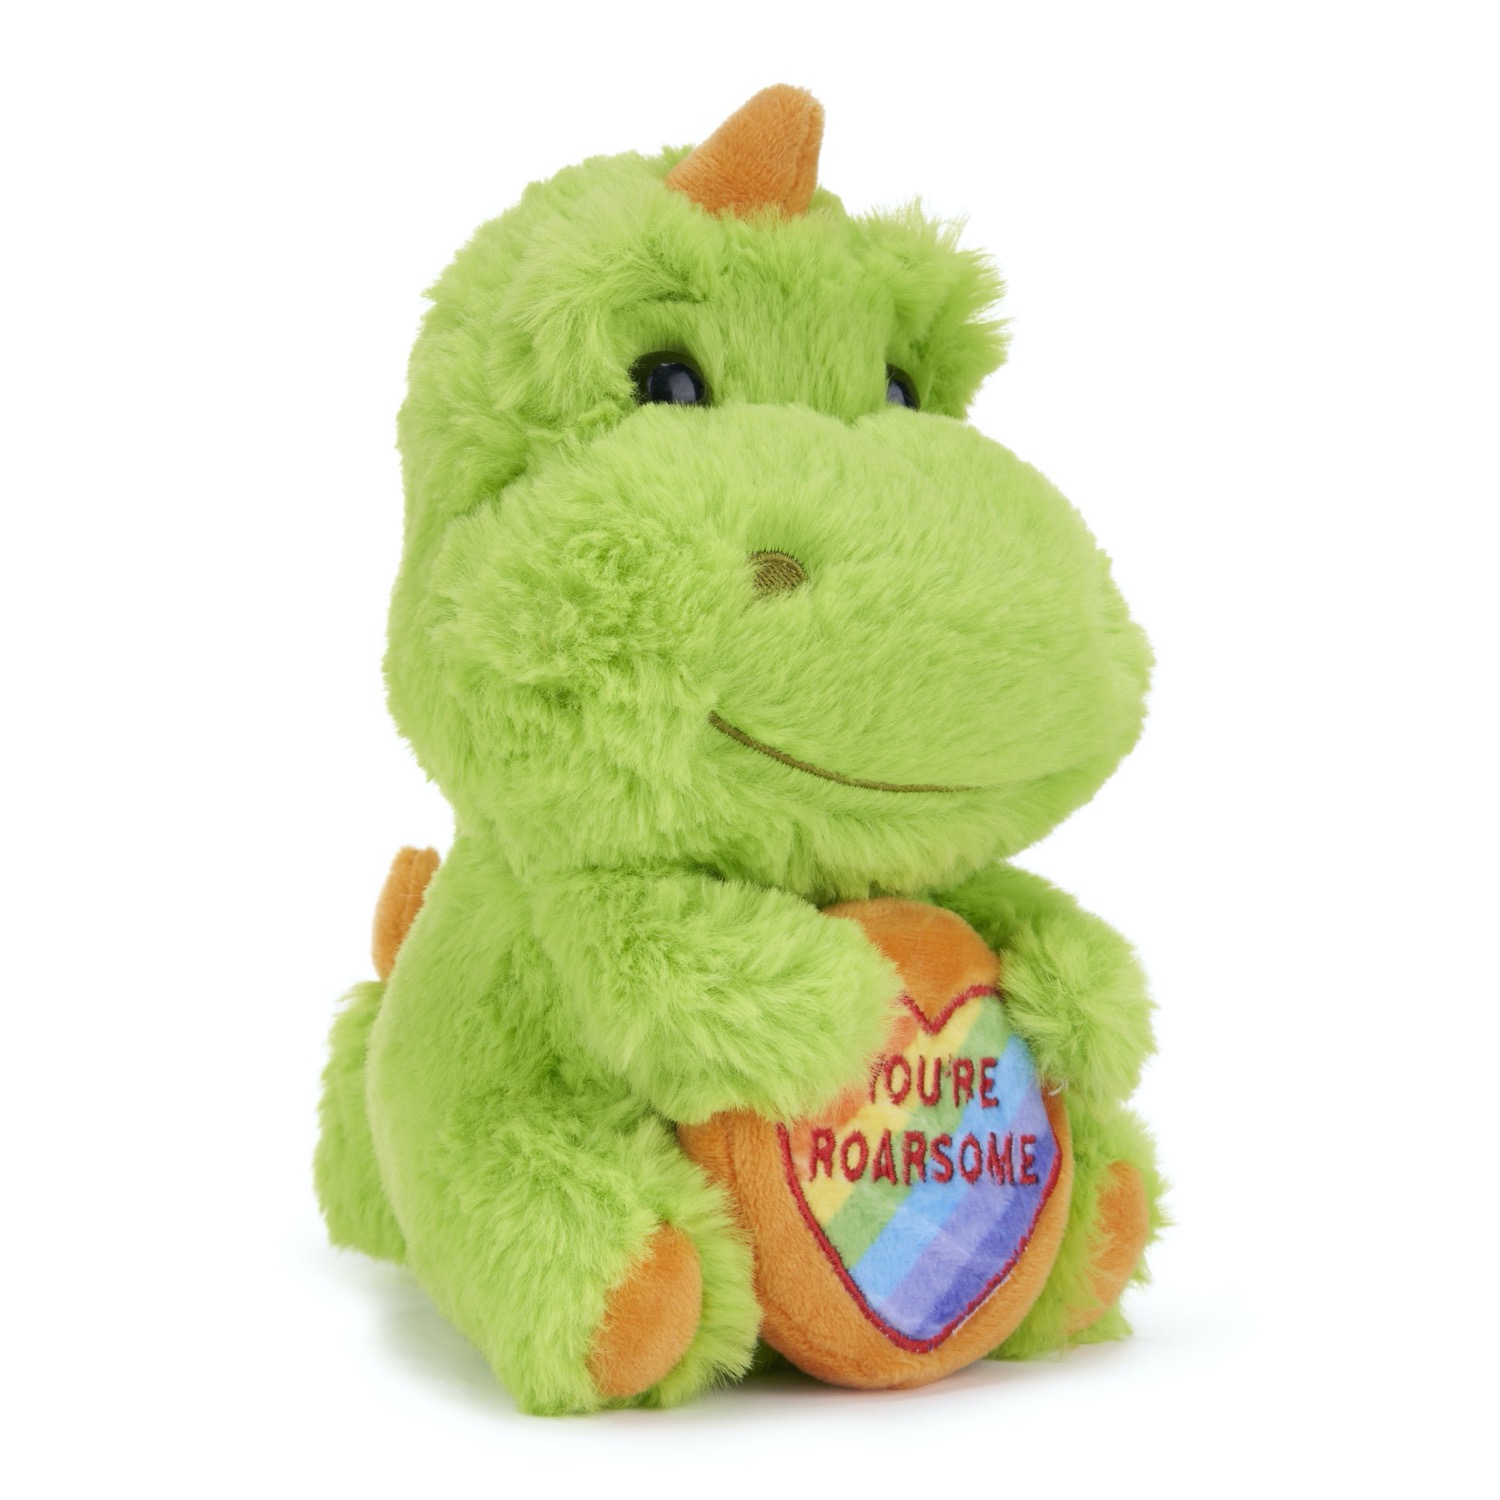 SWIZZELS LOVE HEARTS 18CM DINOSAUR 'YOU'RE ROARSOME' 37641 PLUSH SOFT CUDDLY TOY 